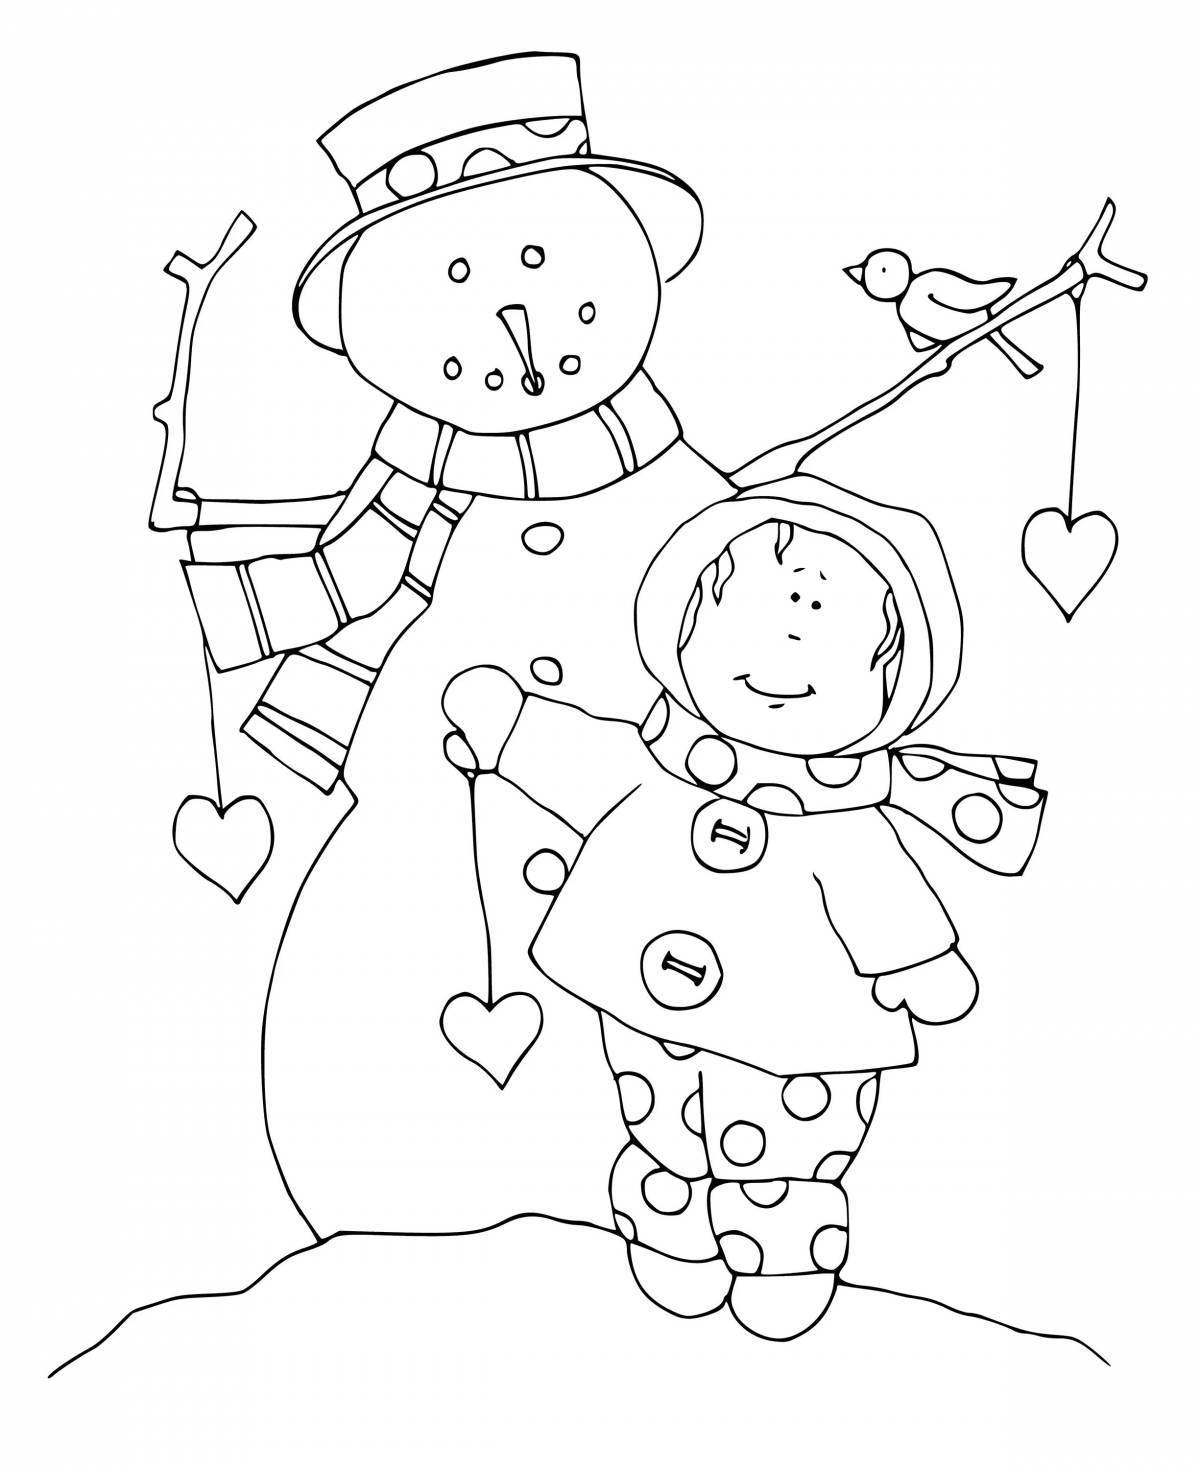 Fancy snowman day coloring page